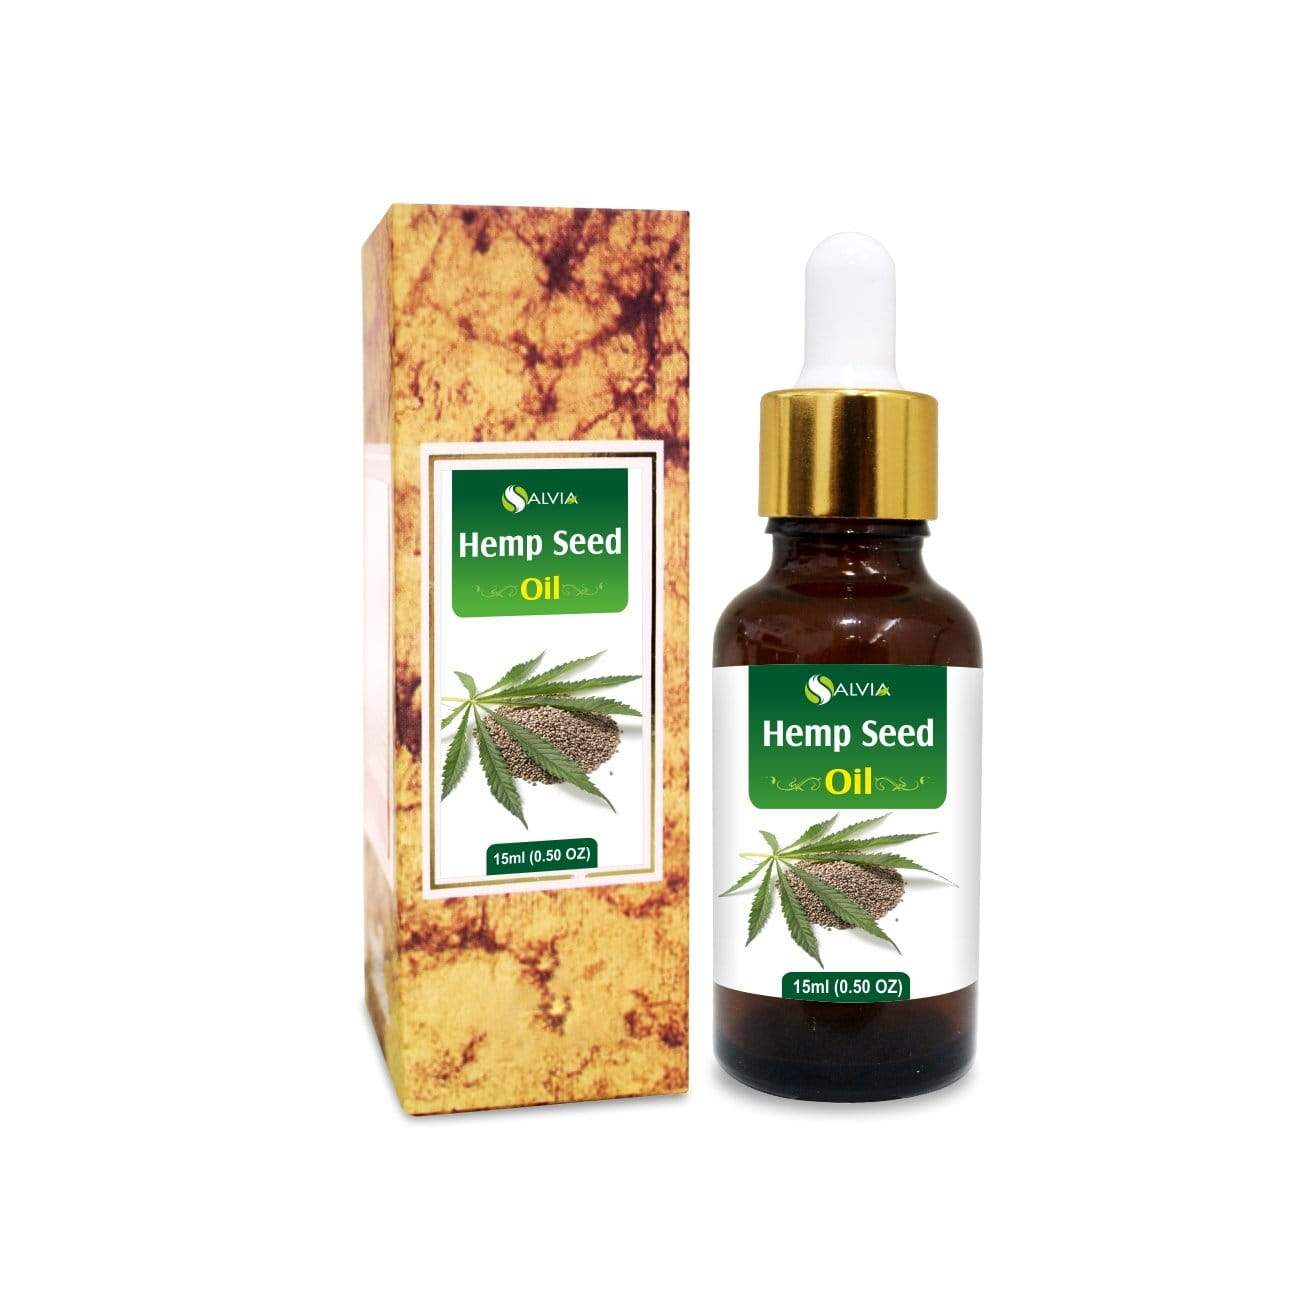 Salvia Natural Carrier Oils 15ml Hemp Seed Oil (Cannabis sativa) | Pure And Natural Non- comedogenic Seed Oil | Alleviate Dry Skin, Strengthen Nails And Heal Cuticles, Remove Makeup, Condition Hair, Reduce Acne